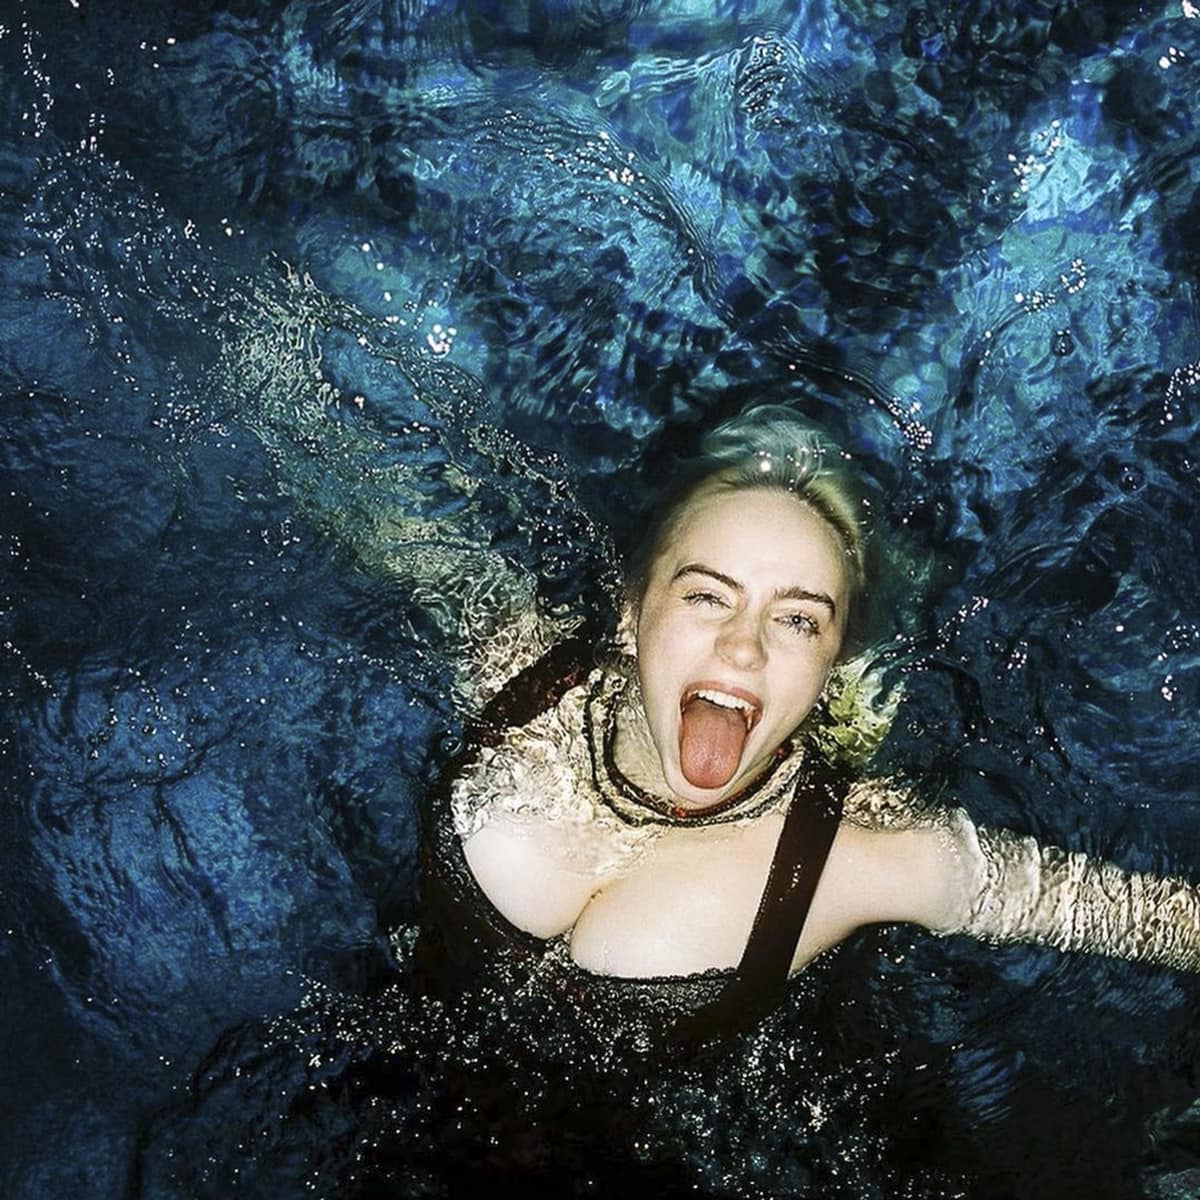 Billie Eilish celebrates her album Happier Than Ever by jumping into a pool with her clothes on